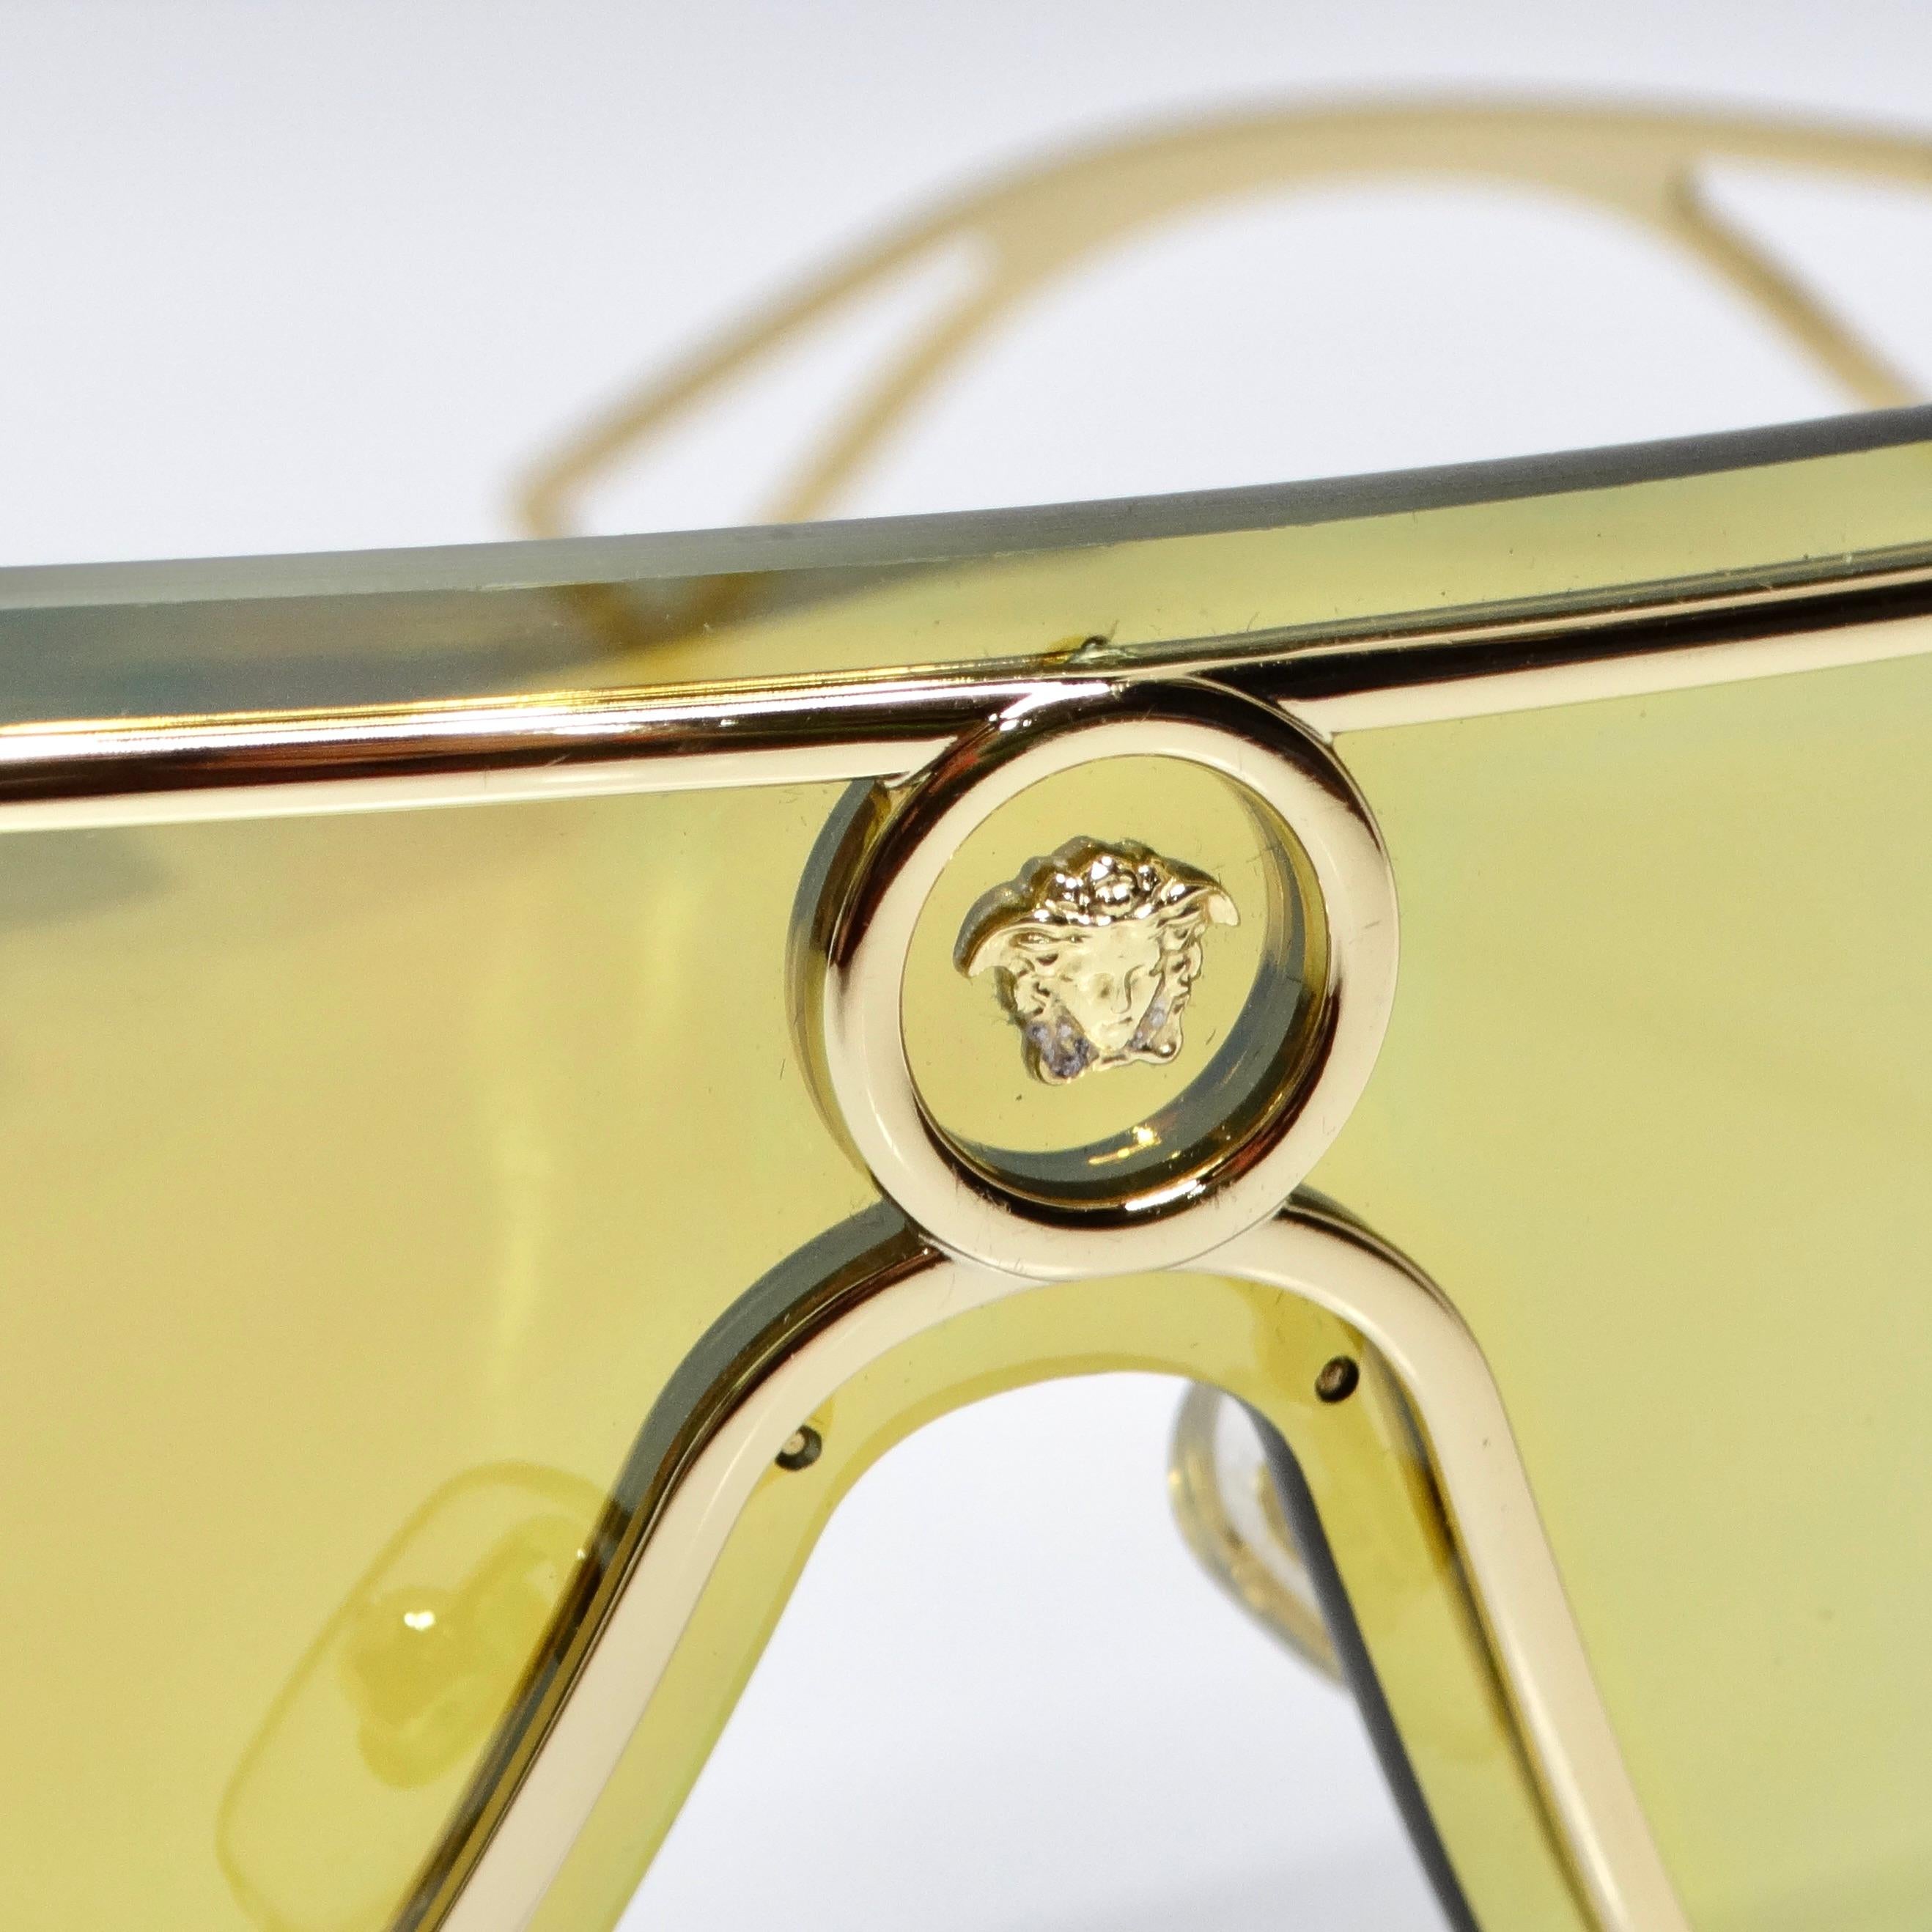 Introducing the Versace Medusa Gold Tone Mirrored Shield Sunglasses, a striking and luxurious accessory that exudes glamour and style. These incredible statement sunglasses are sure to turn heads with their bold design and impeccable